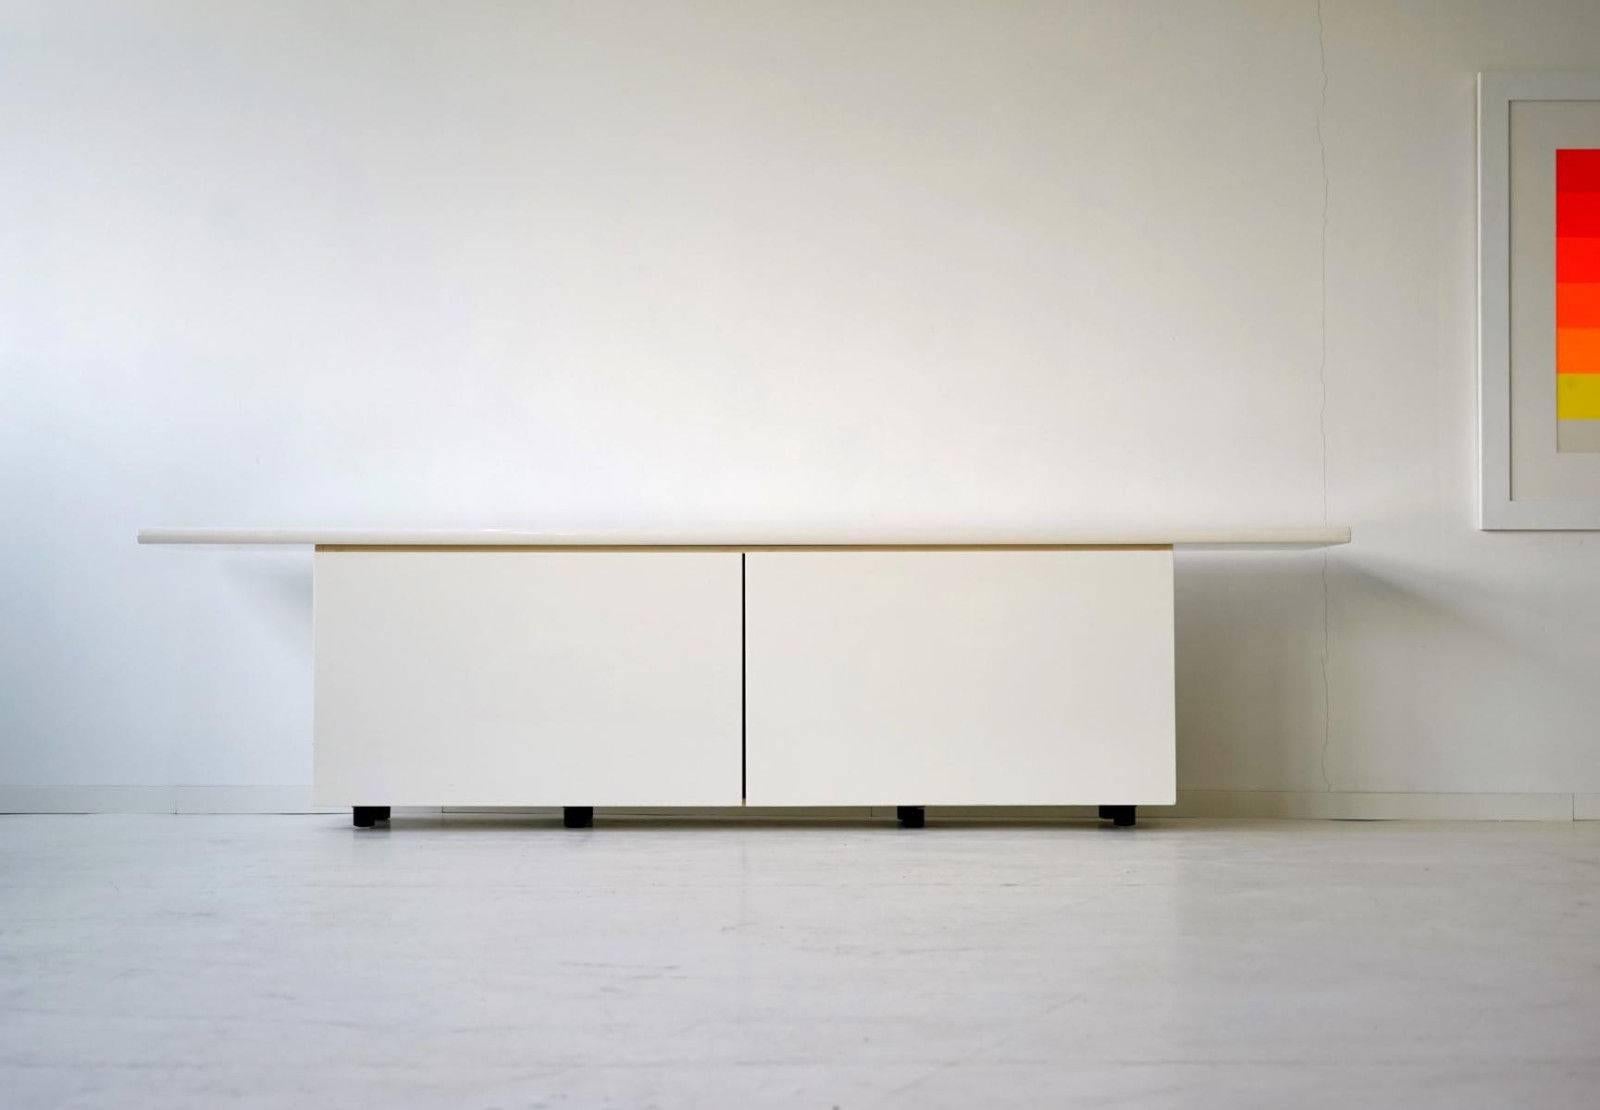 White model Sheraton sideboard.
Features wide doors that slide and swing. Simple and timeless design. 

+ Very good quality
+ Simple and timeless design
+ Very practical due to the sliding swing-door system.